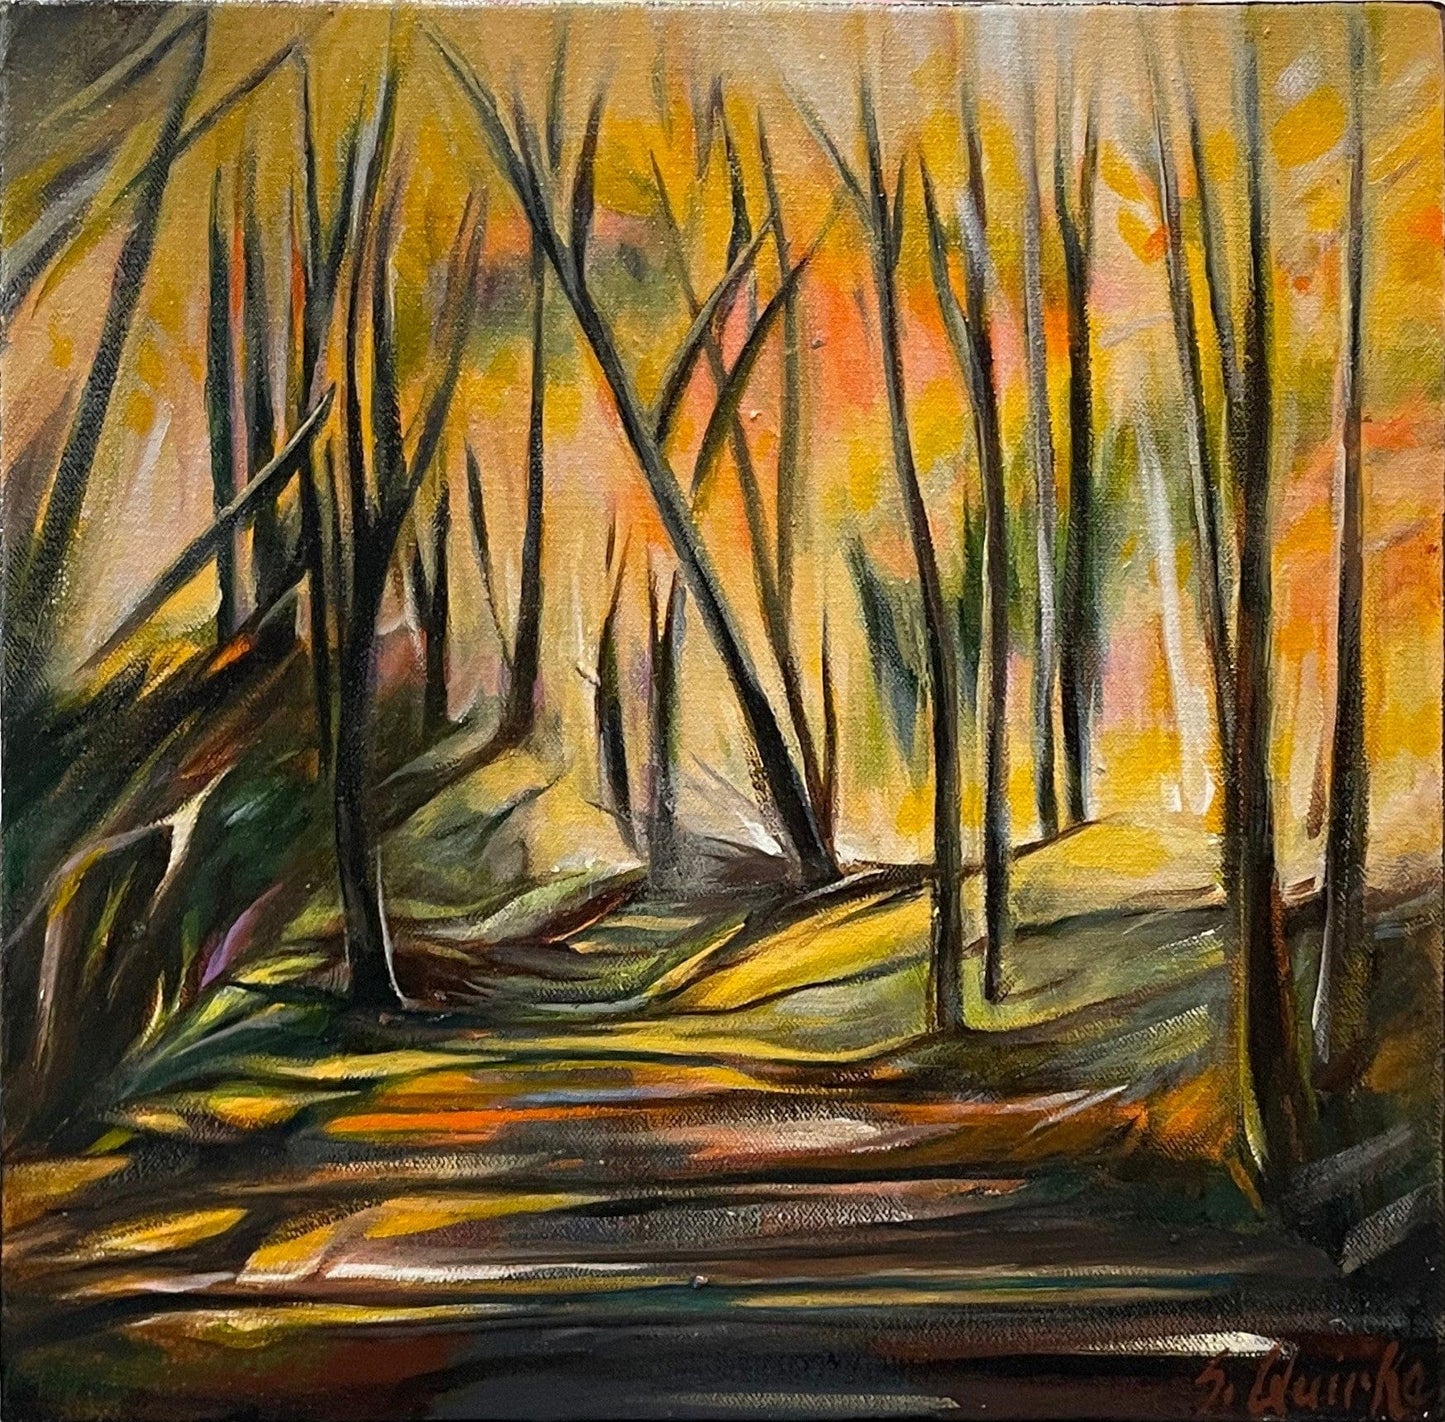 Sharon Quirke painting Autumn Trail #1 Art Works Gallery